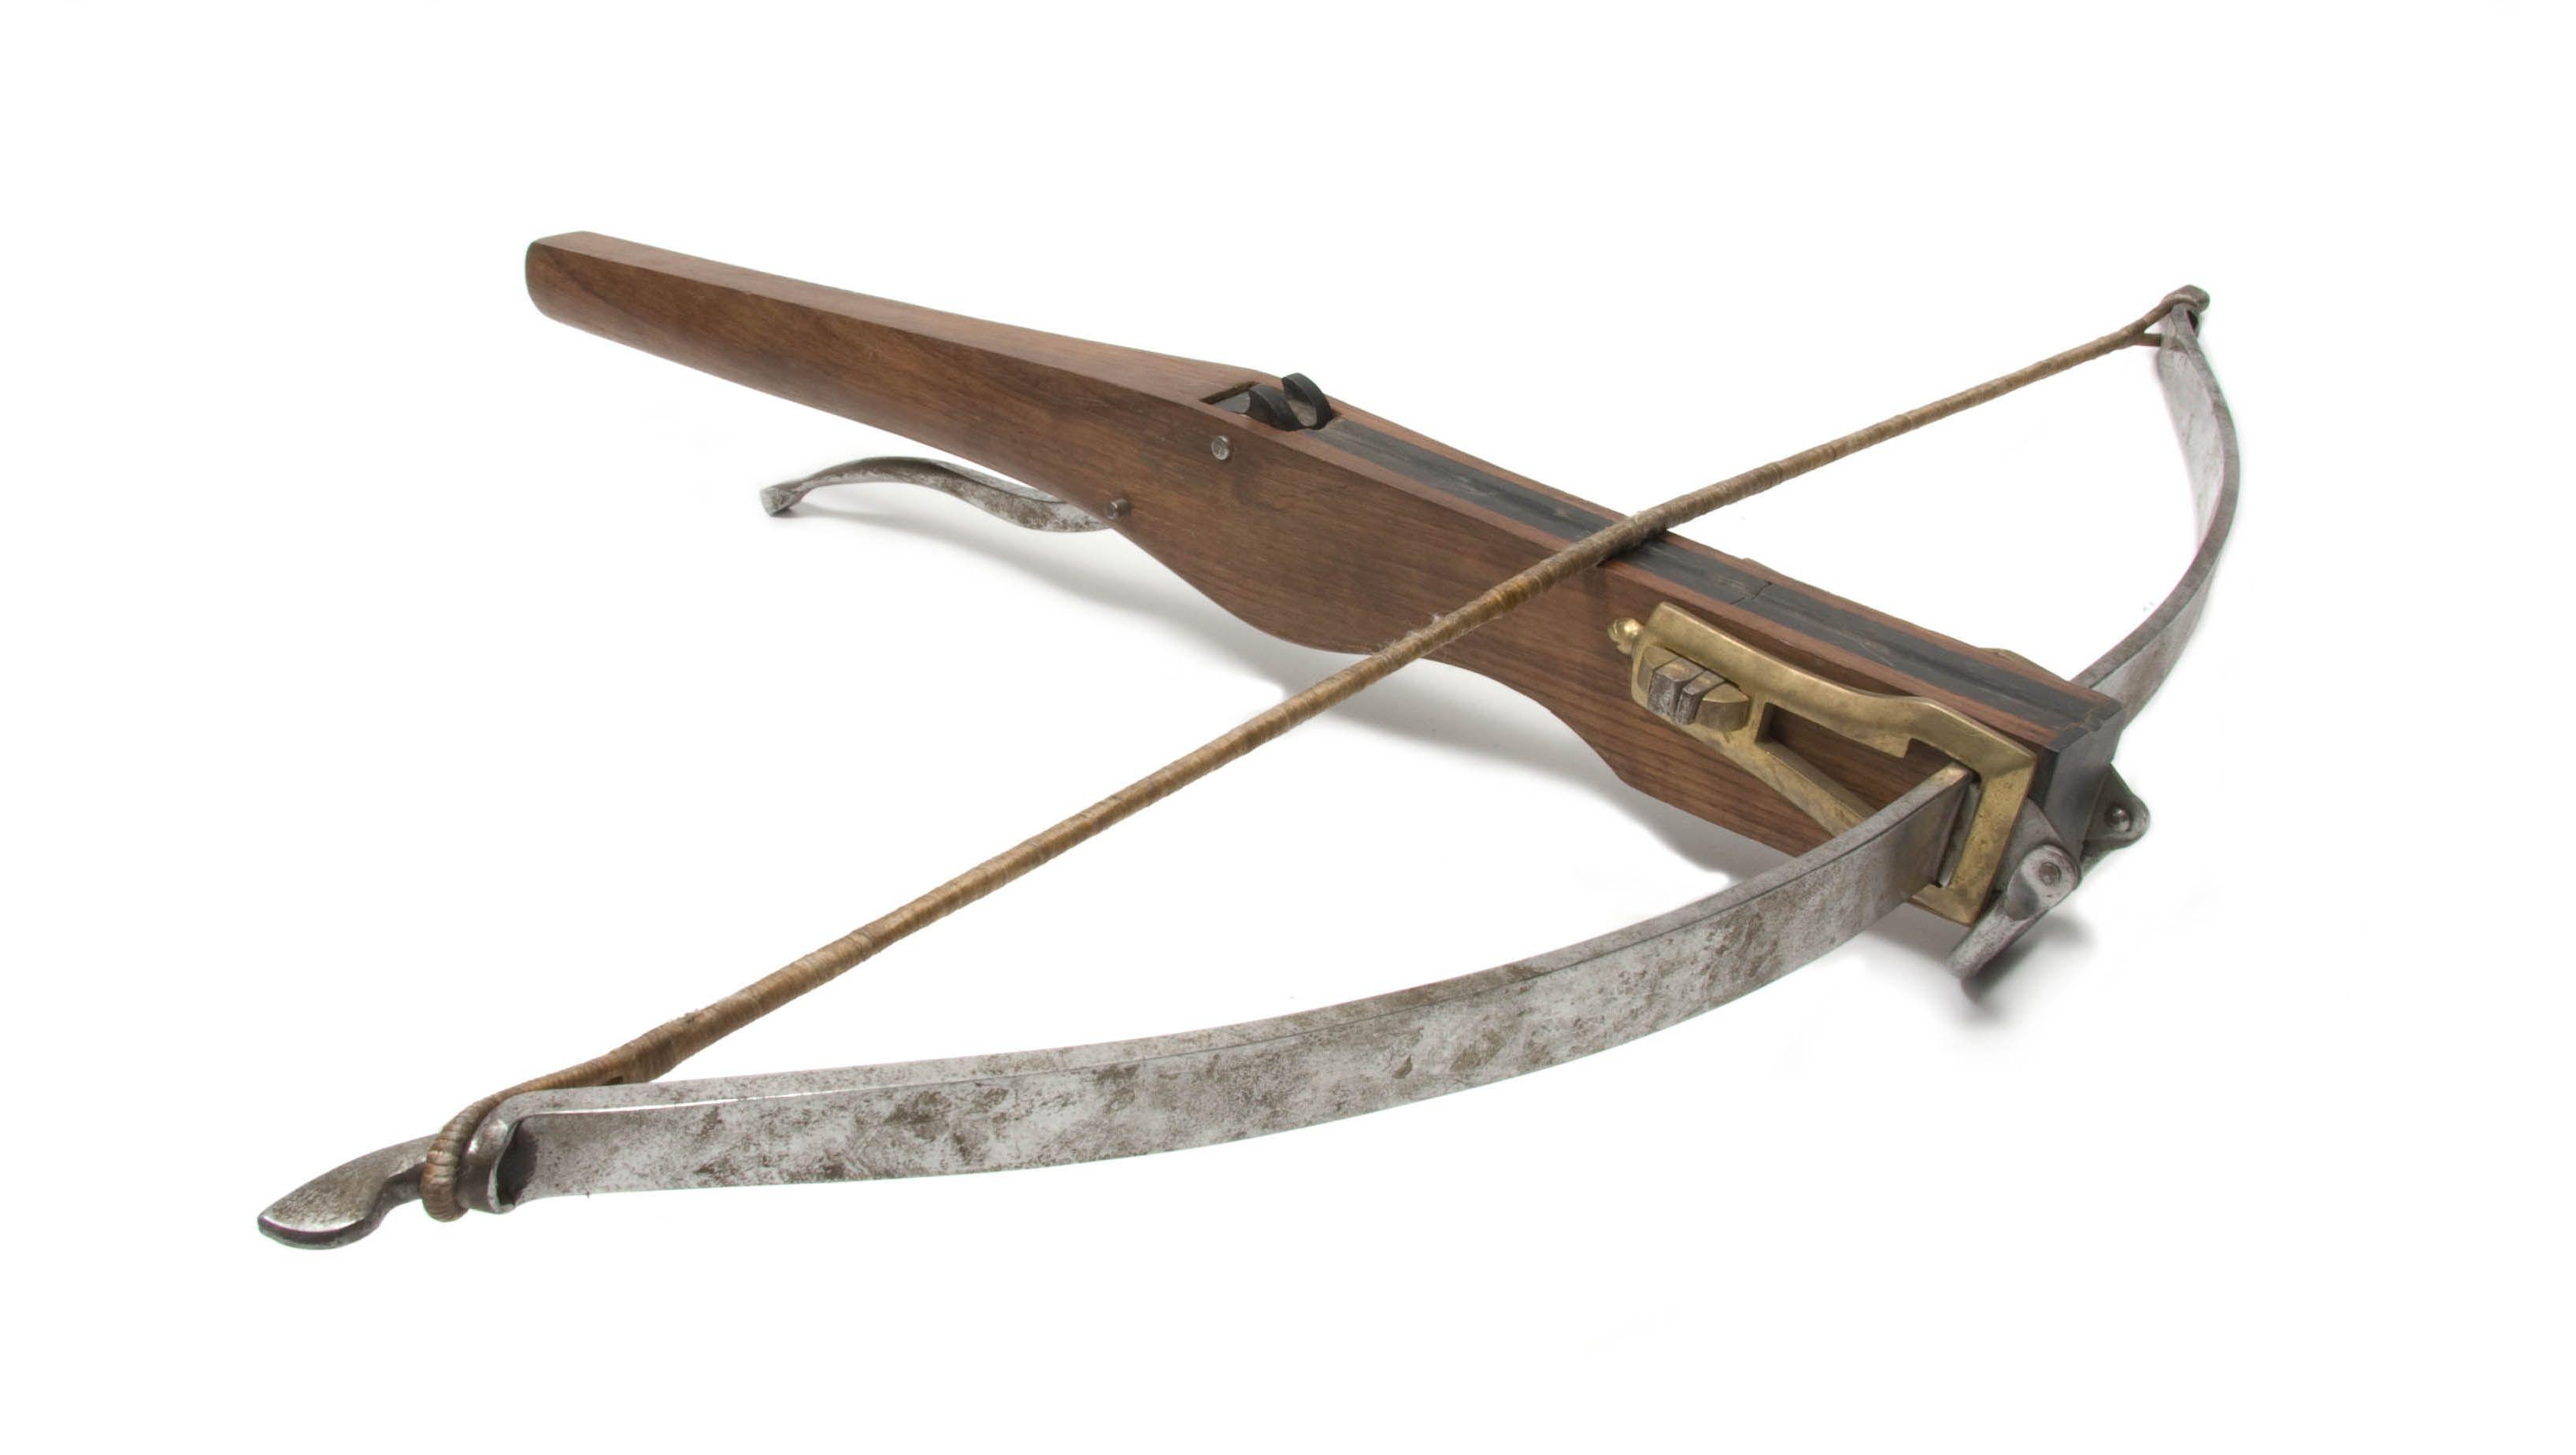 Crossbow HD Wallpaper and Background Image